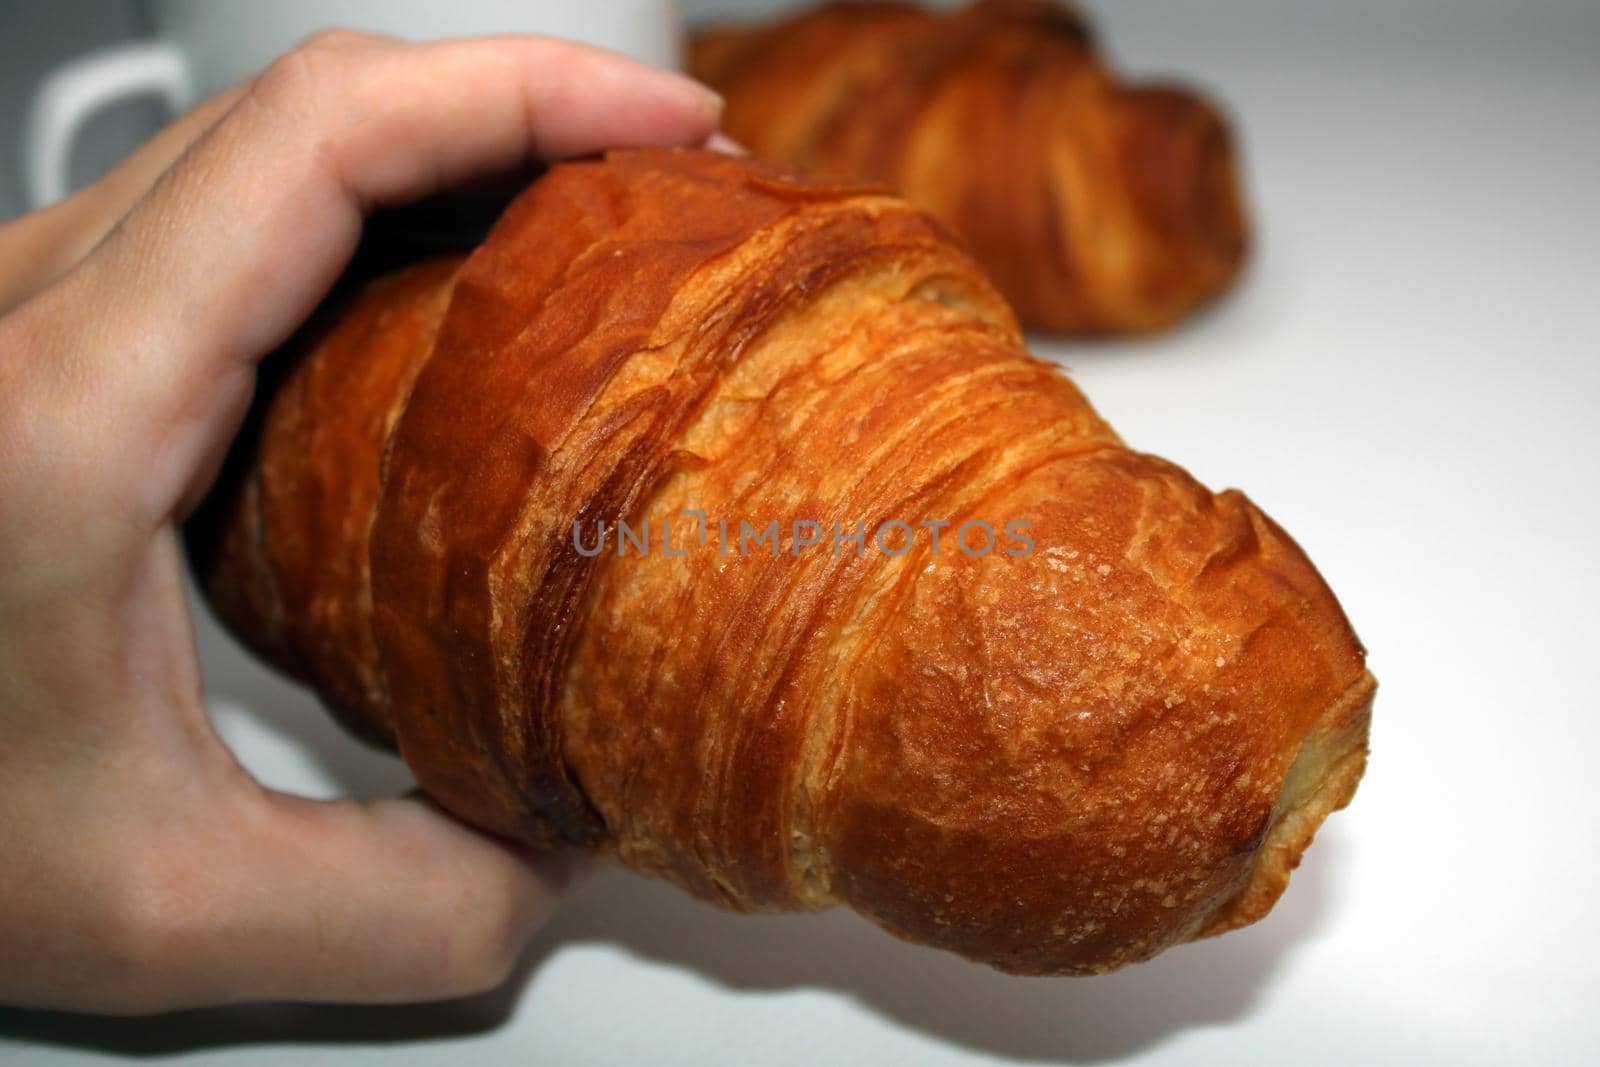 Fresh crispy croissant close-up in hand. Blurred light background. Cooking, home baking.